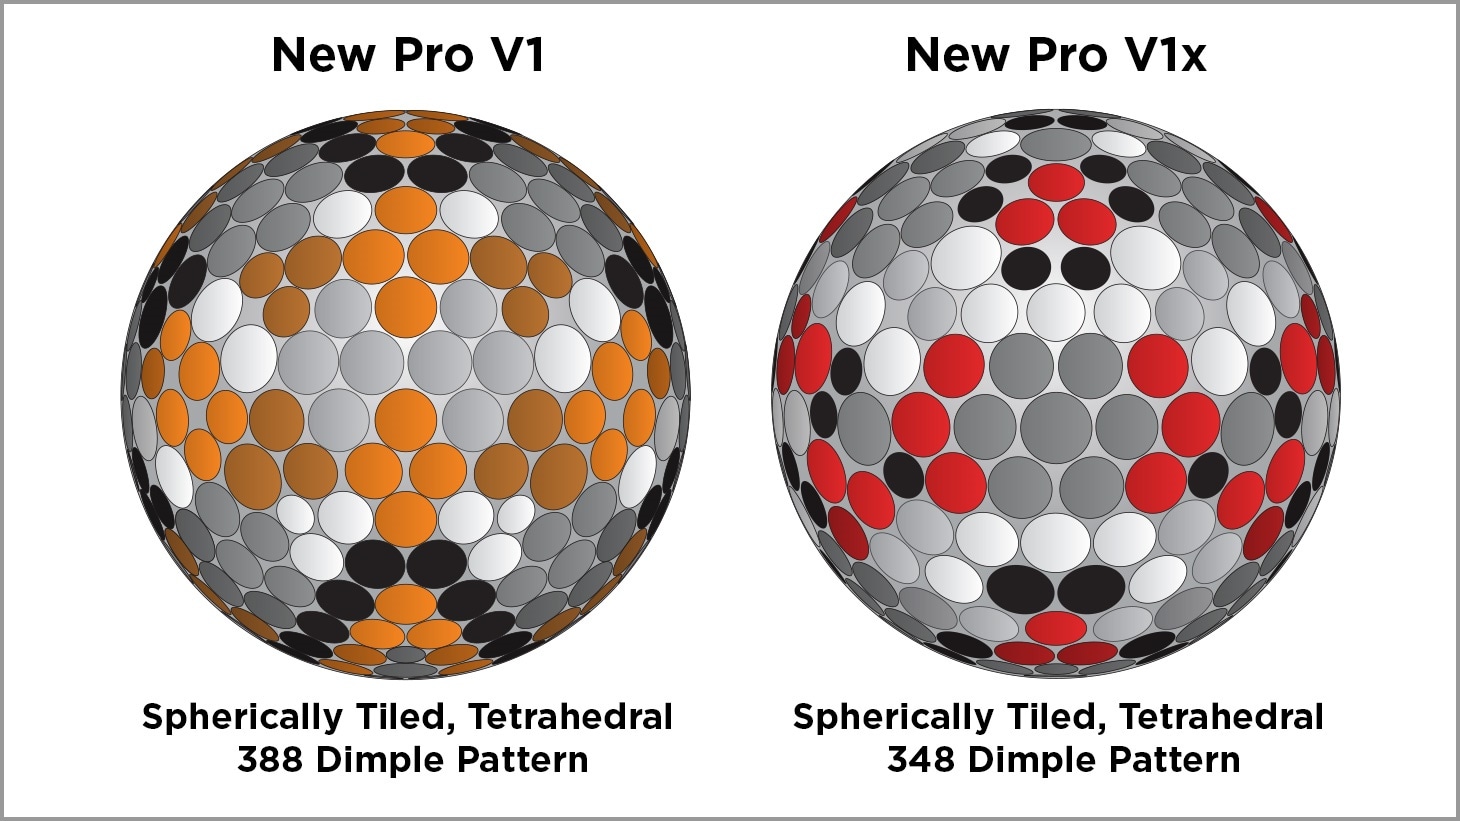 Graphic detailing the new 388 dimple pattern of the 2021 Pro V1 and the 348 Dimple pattern for the new Pro V1x golf ball